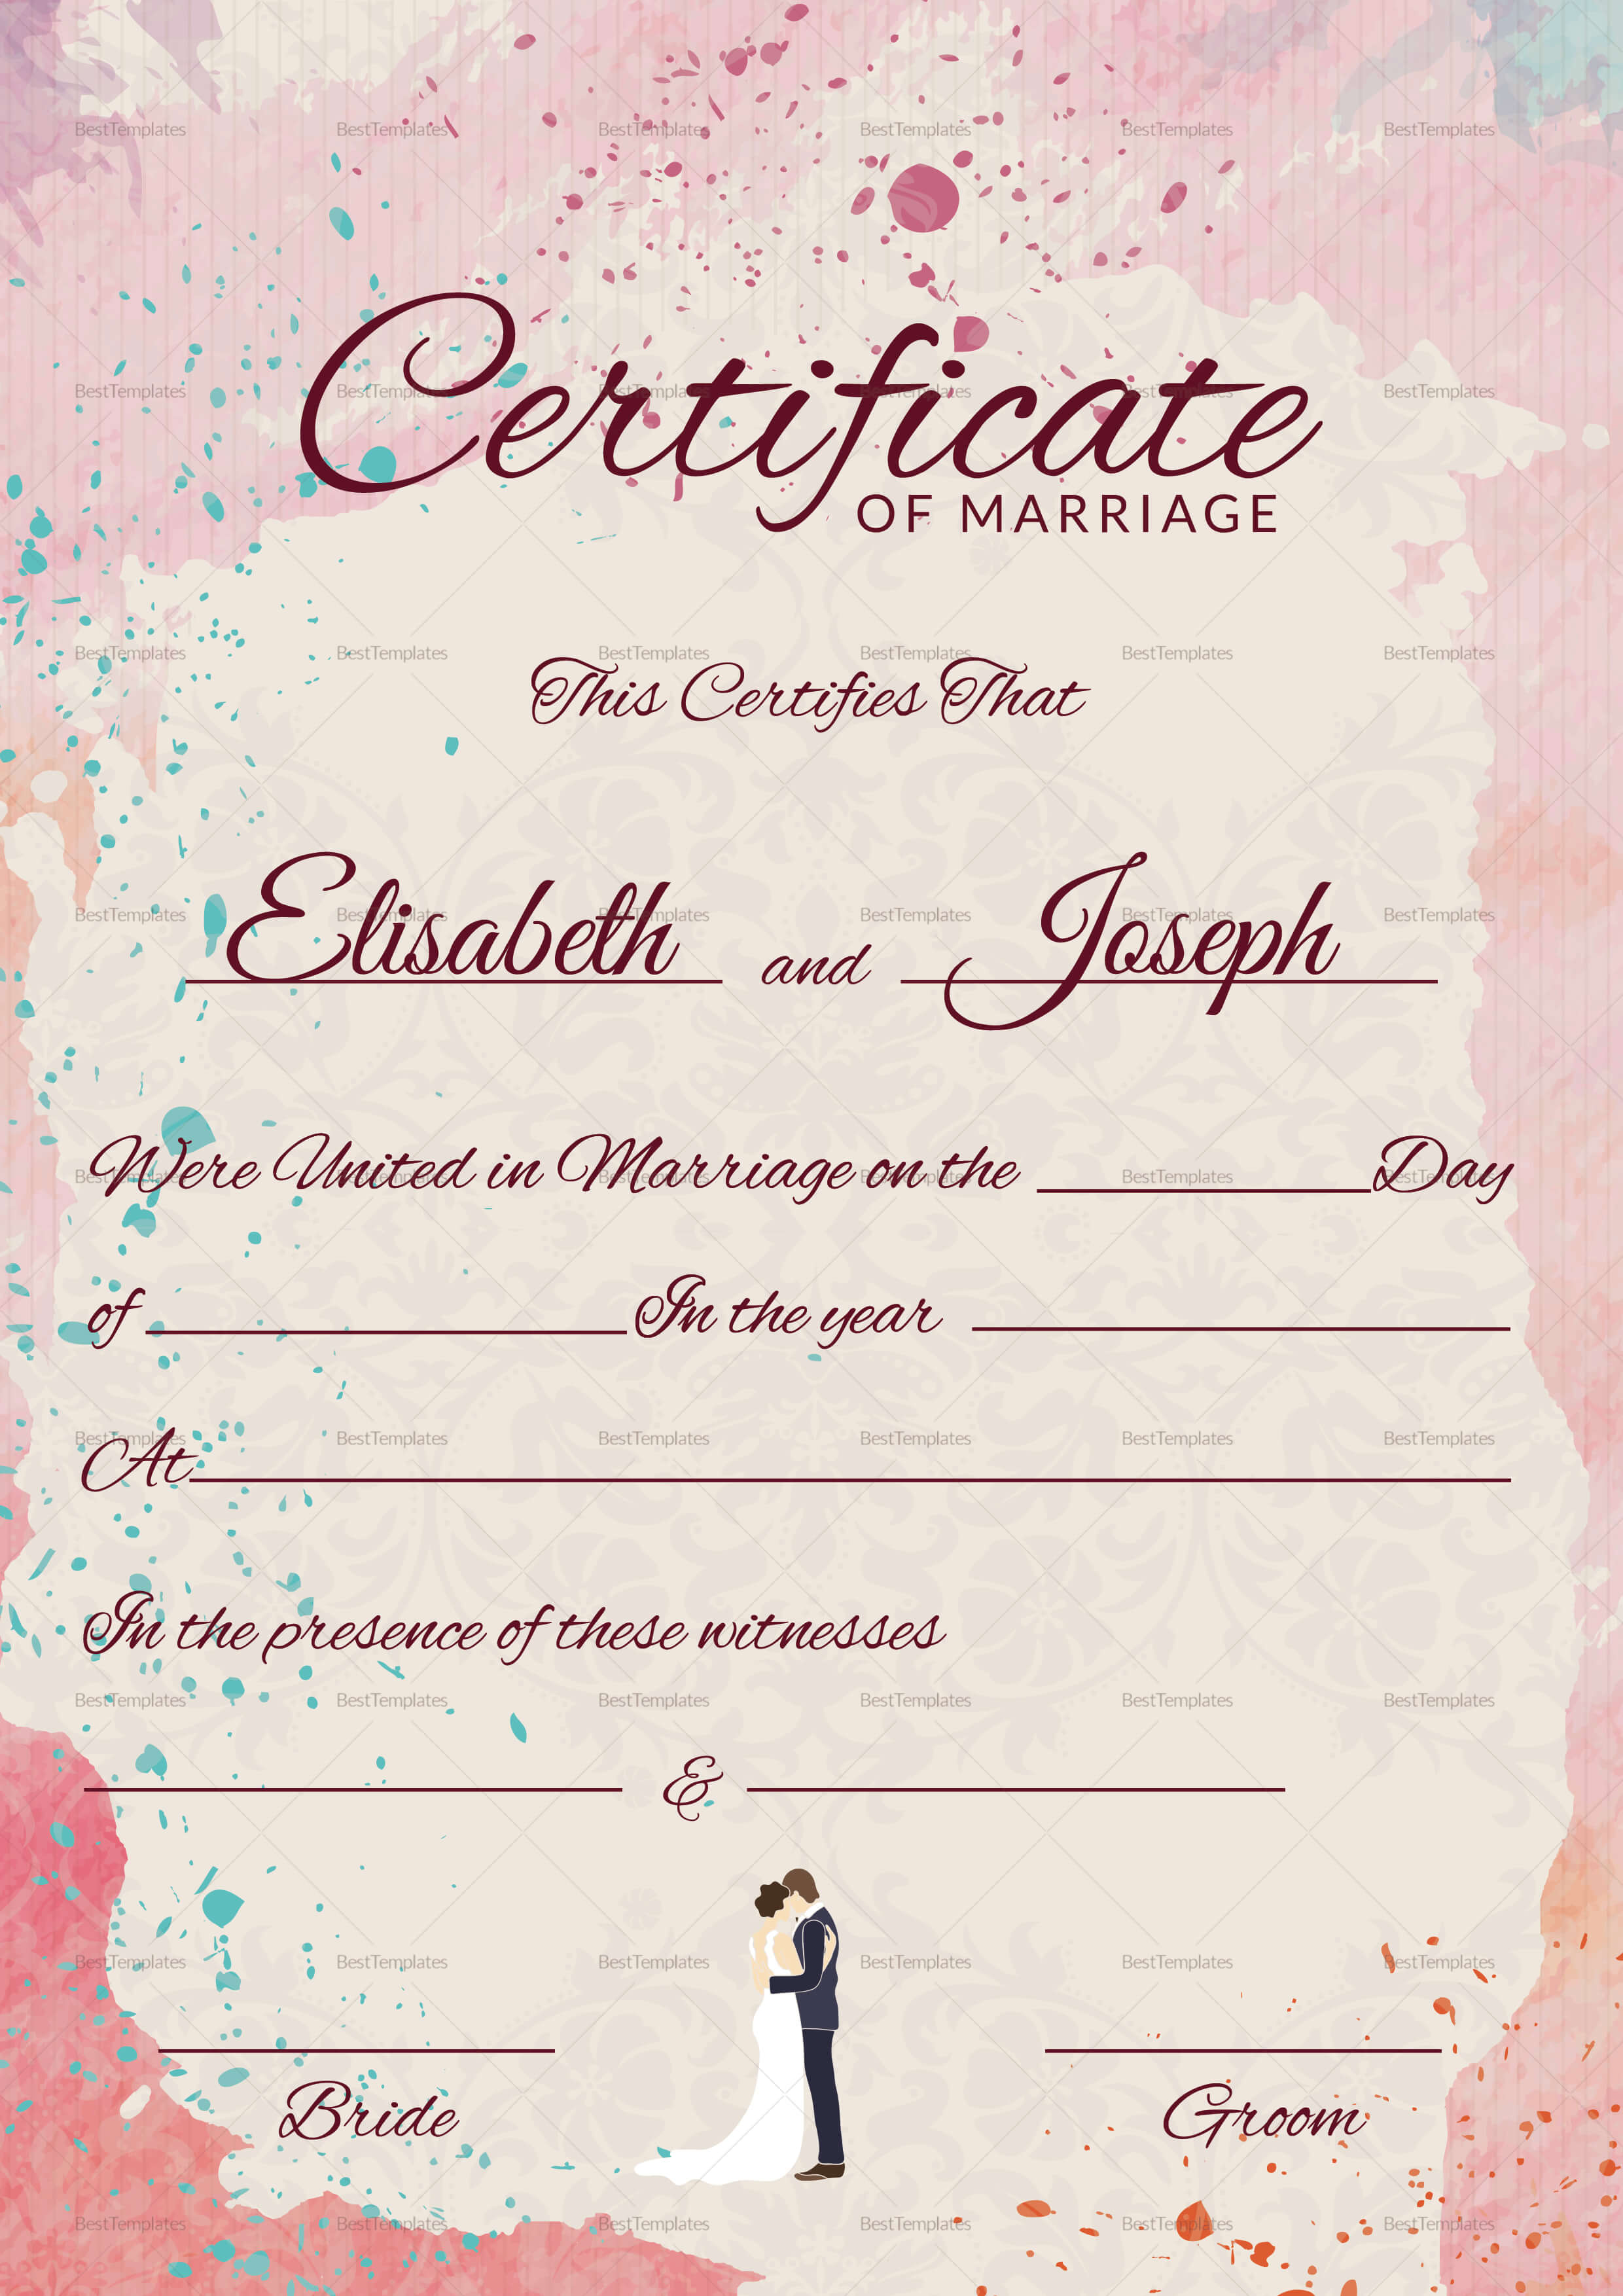 Christian Marriage Certificate Template Intended For Christian Certificate Template